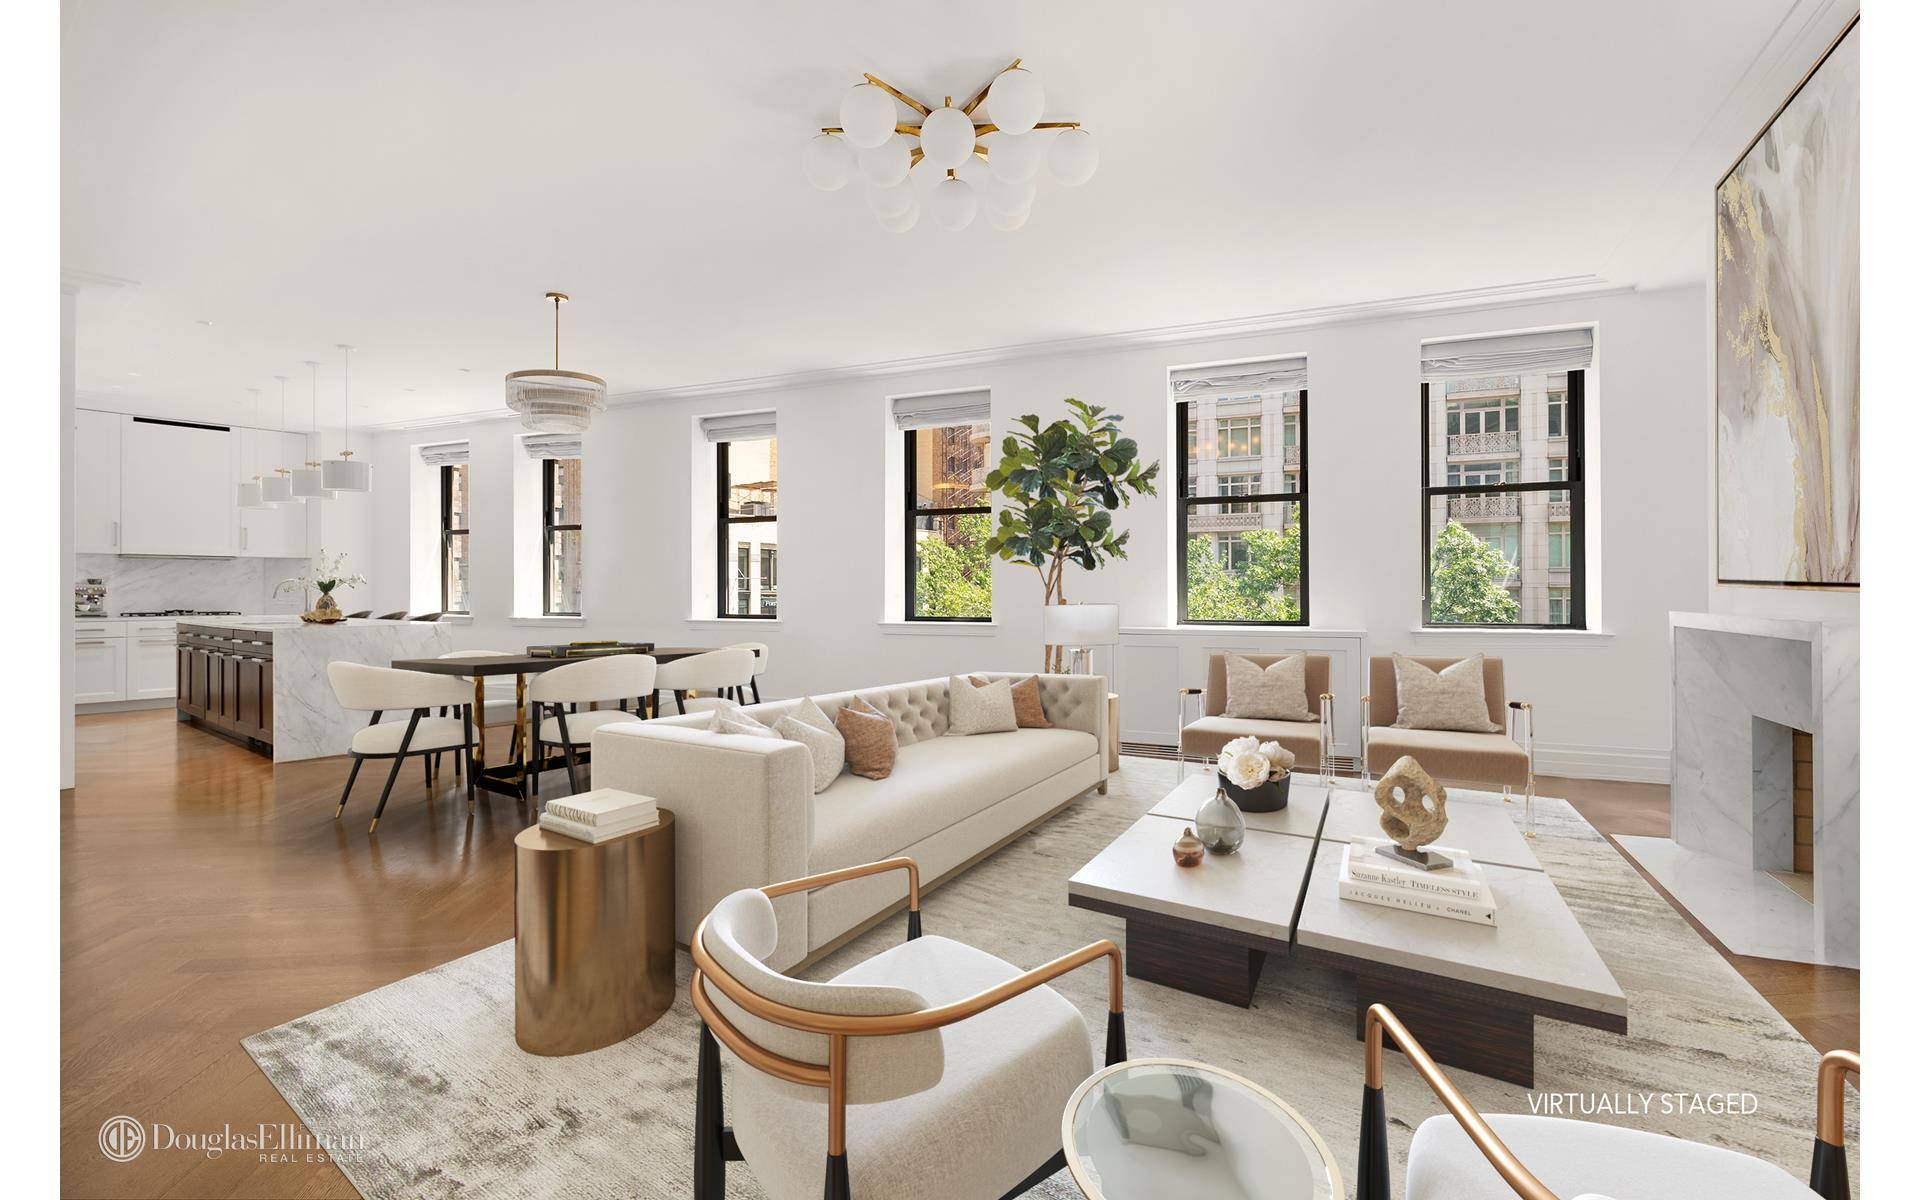 Contemporary Upper West Side living meets classic New York in this east facing four bedroom, four and a half bath home at The Astor condominium.